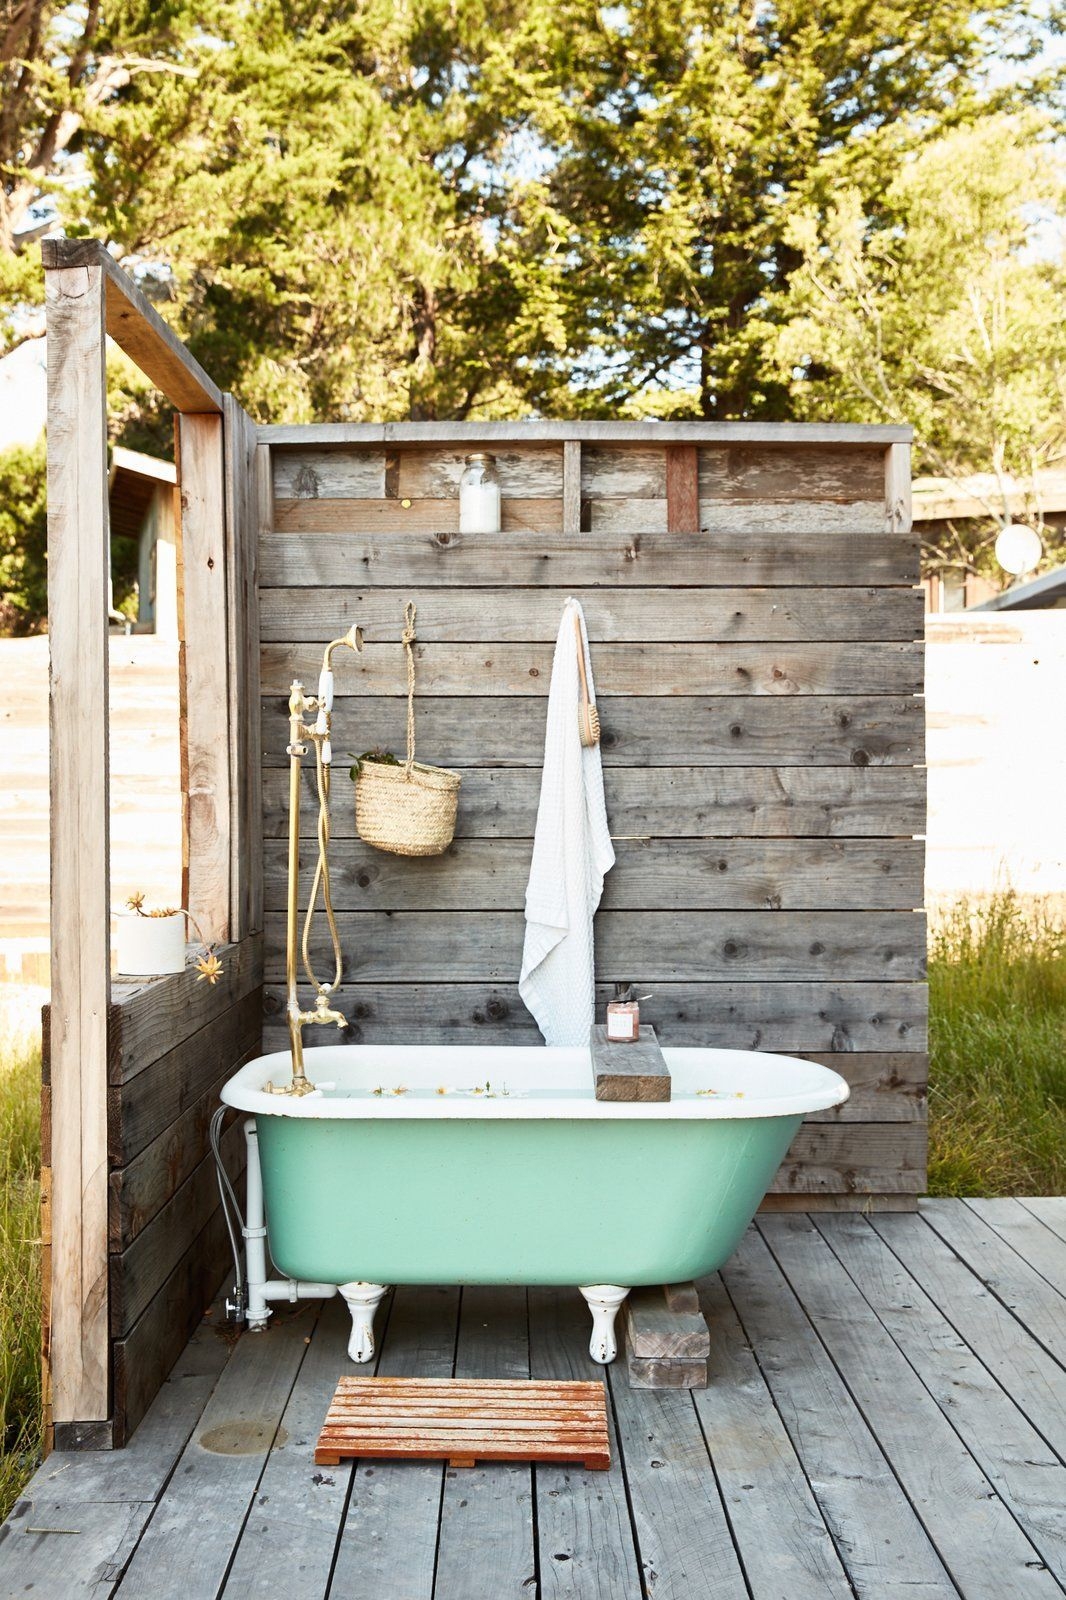 42 Awesome Outdoor Bathroom Ideas - BESTHOMISH